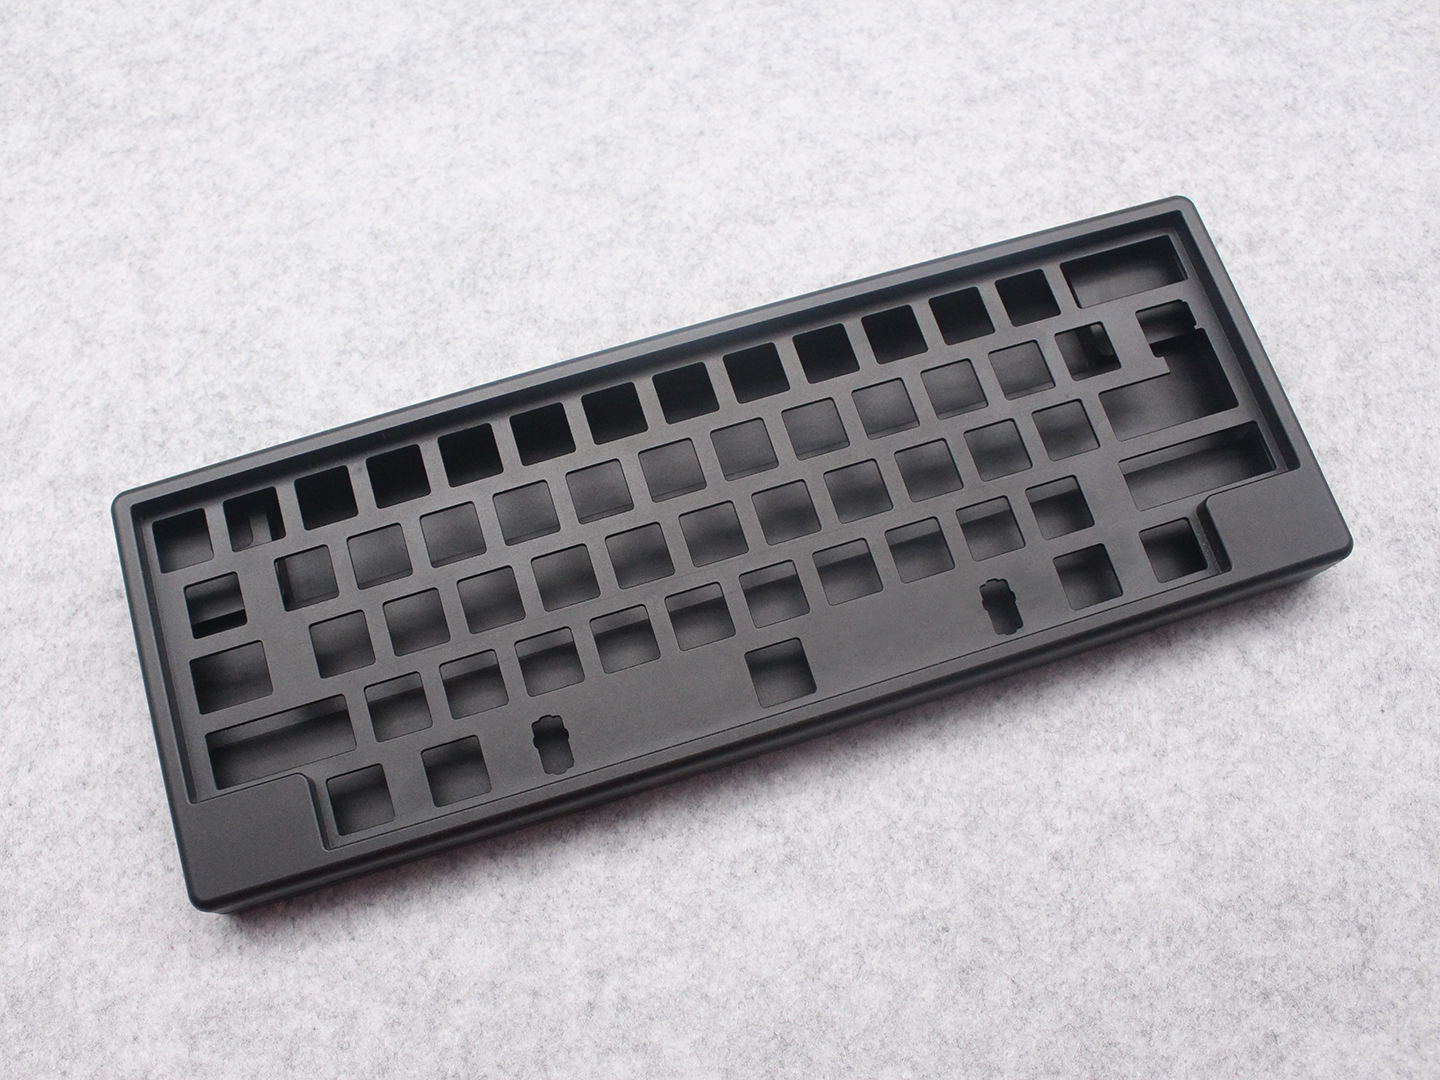 Keyboard with integrated plate